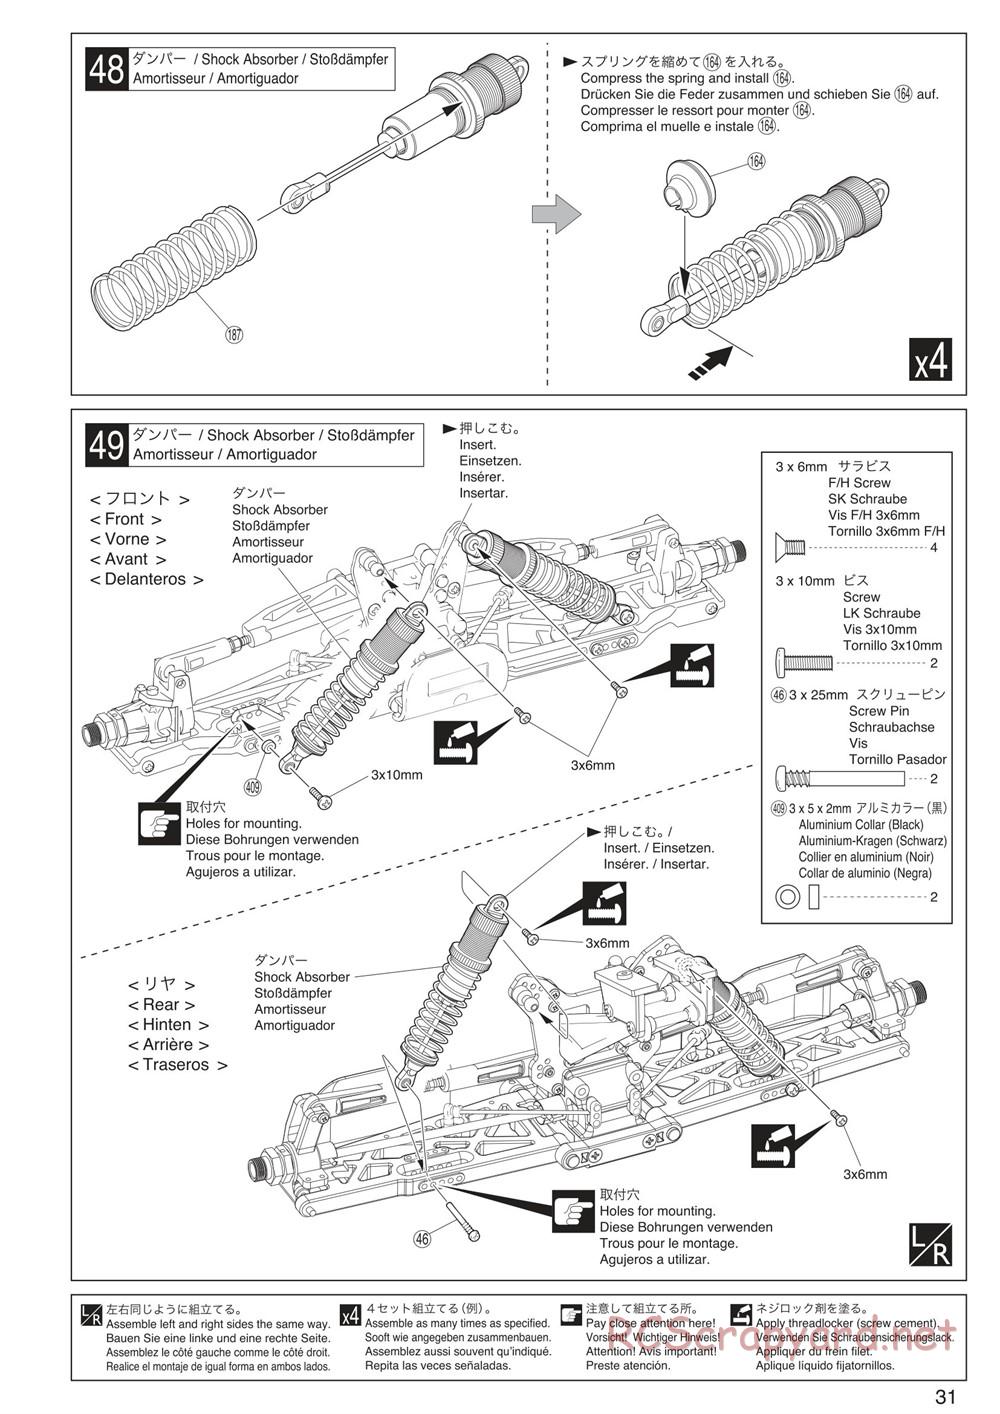 Kyosho - Inferno Neo ST 3.0 - Manual - Page 31